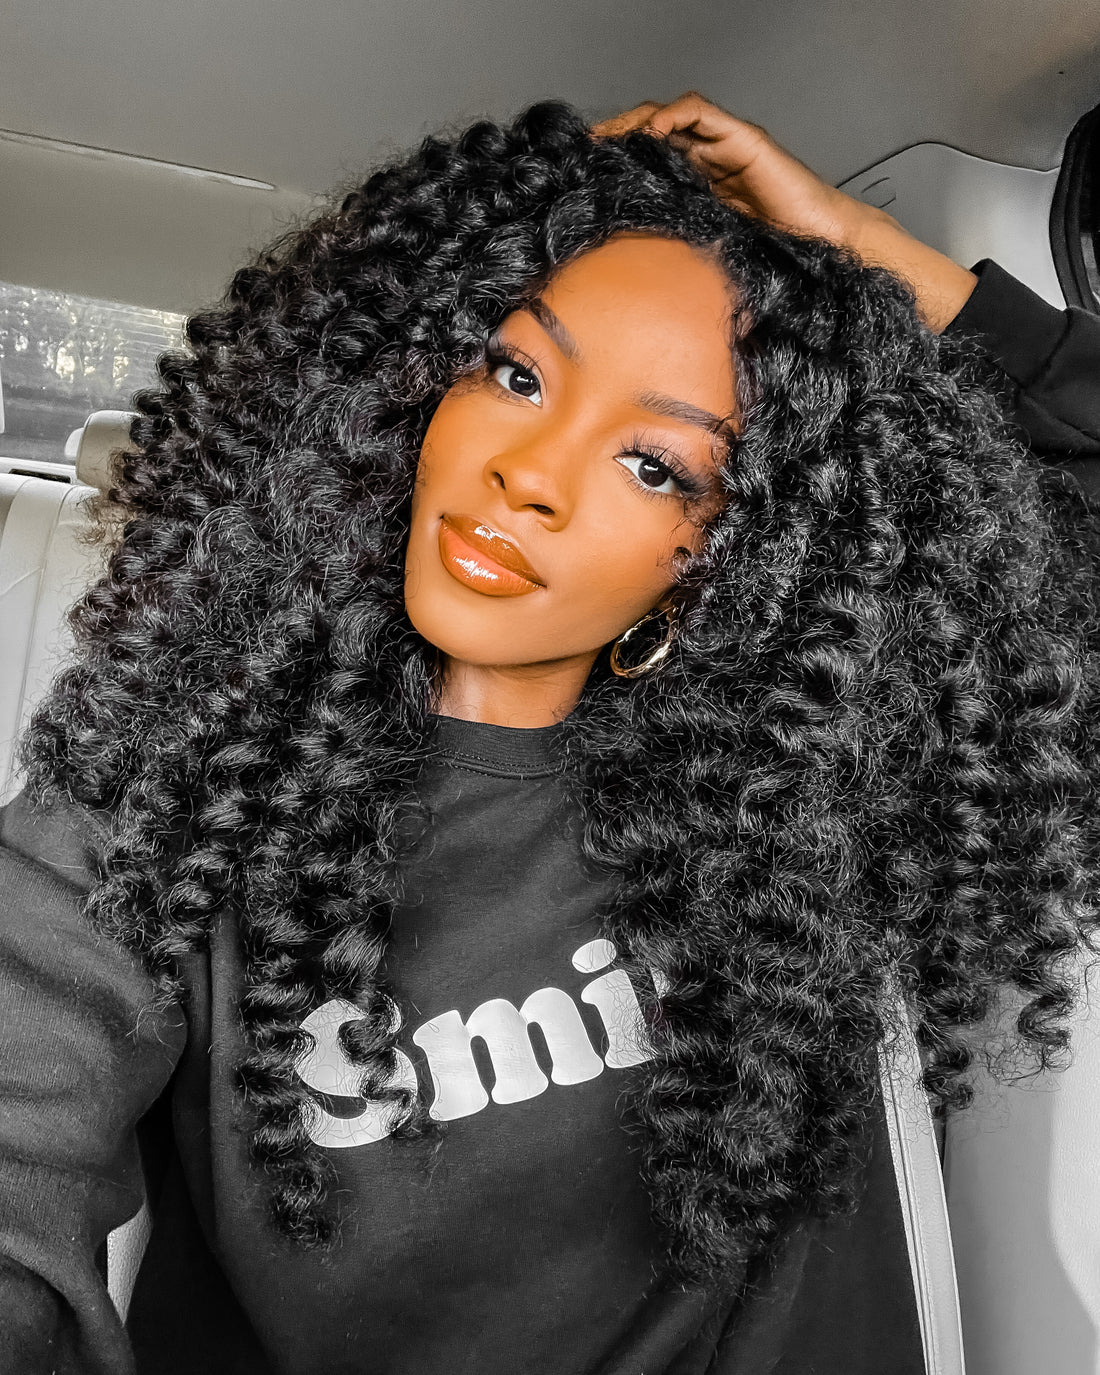 Two Effortless Ways to Style a U-Part Wig